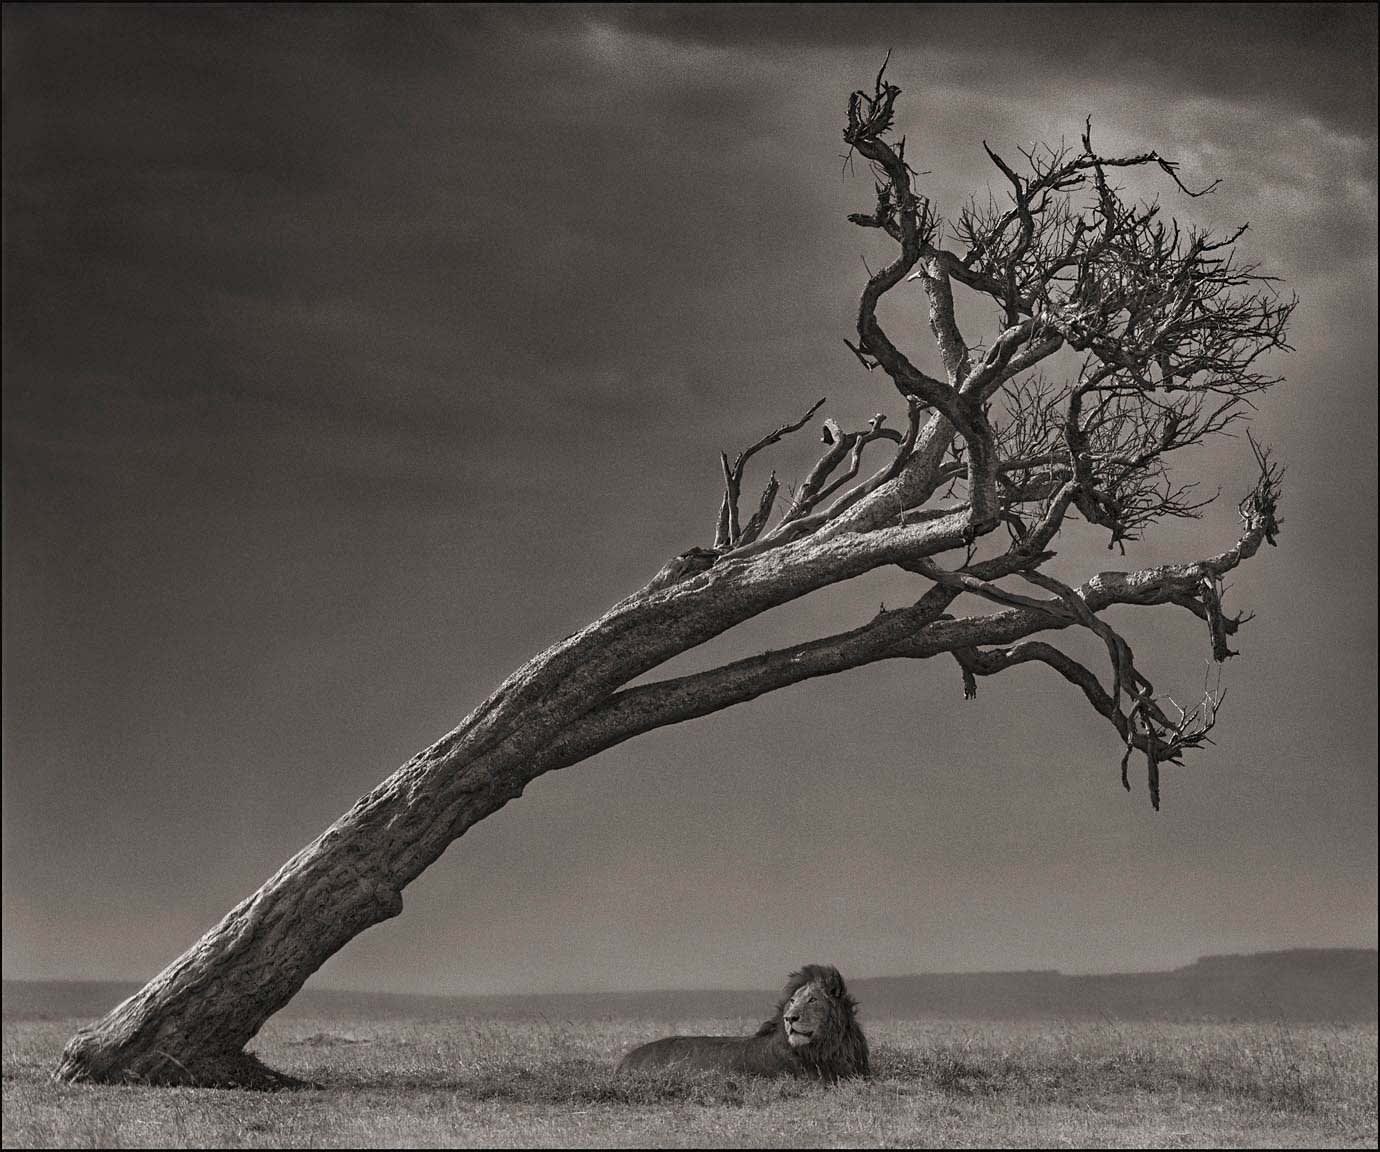 Nick Brandt photograph of lion under leaning tree in Maasai Mara